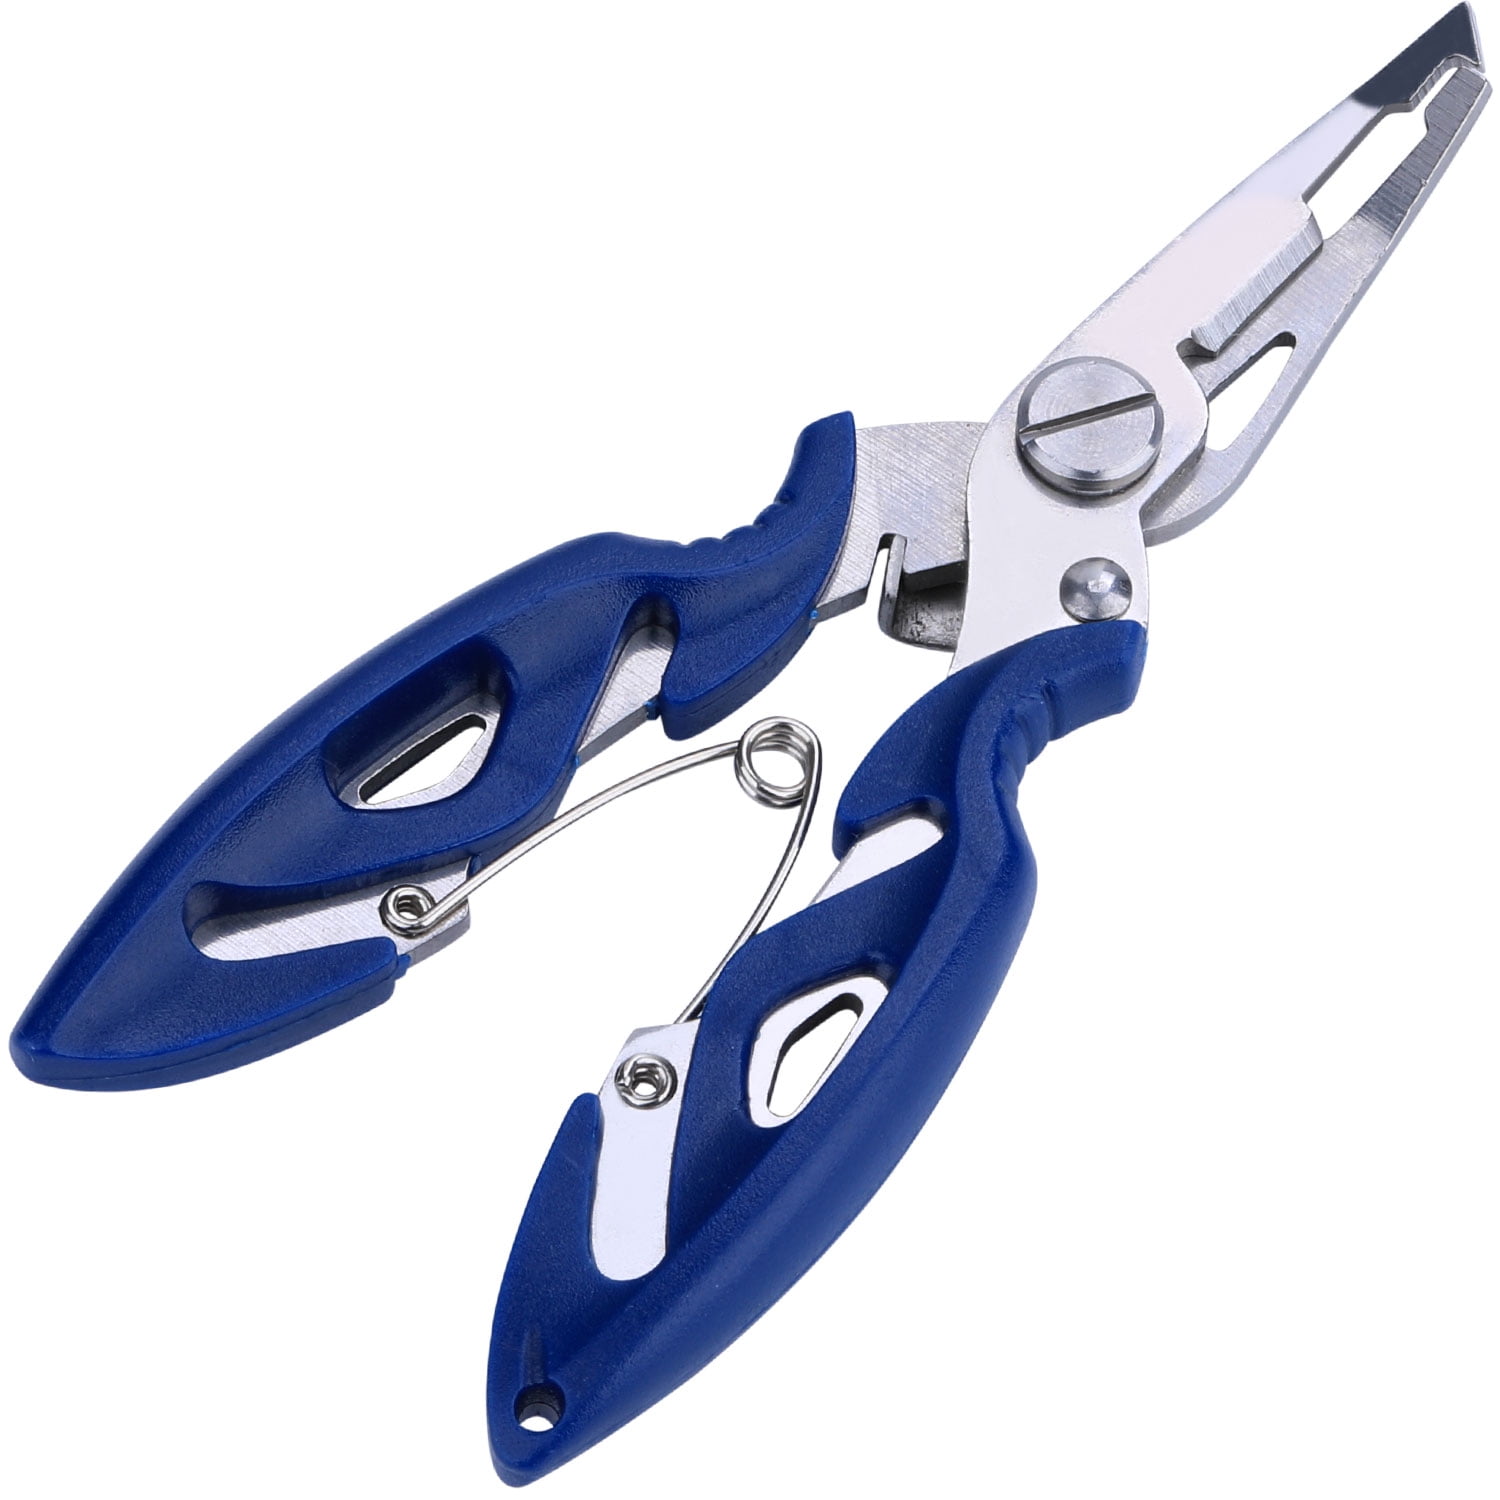 Angling Fishing Pliers Multi-tool Scissors Hook Removal Disgorger Line Cutter UK 